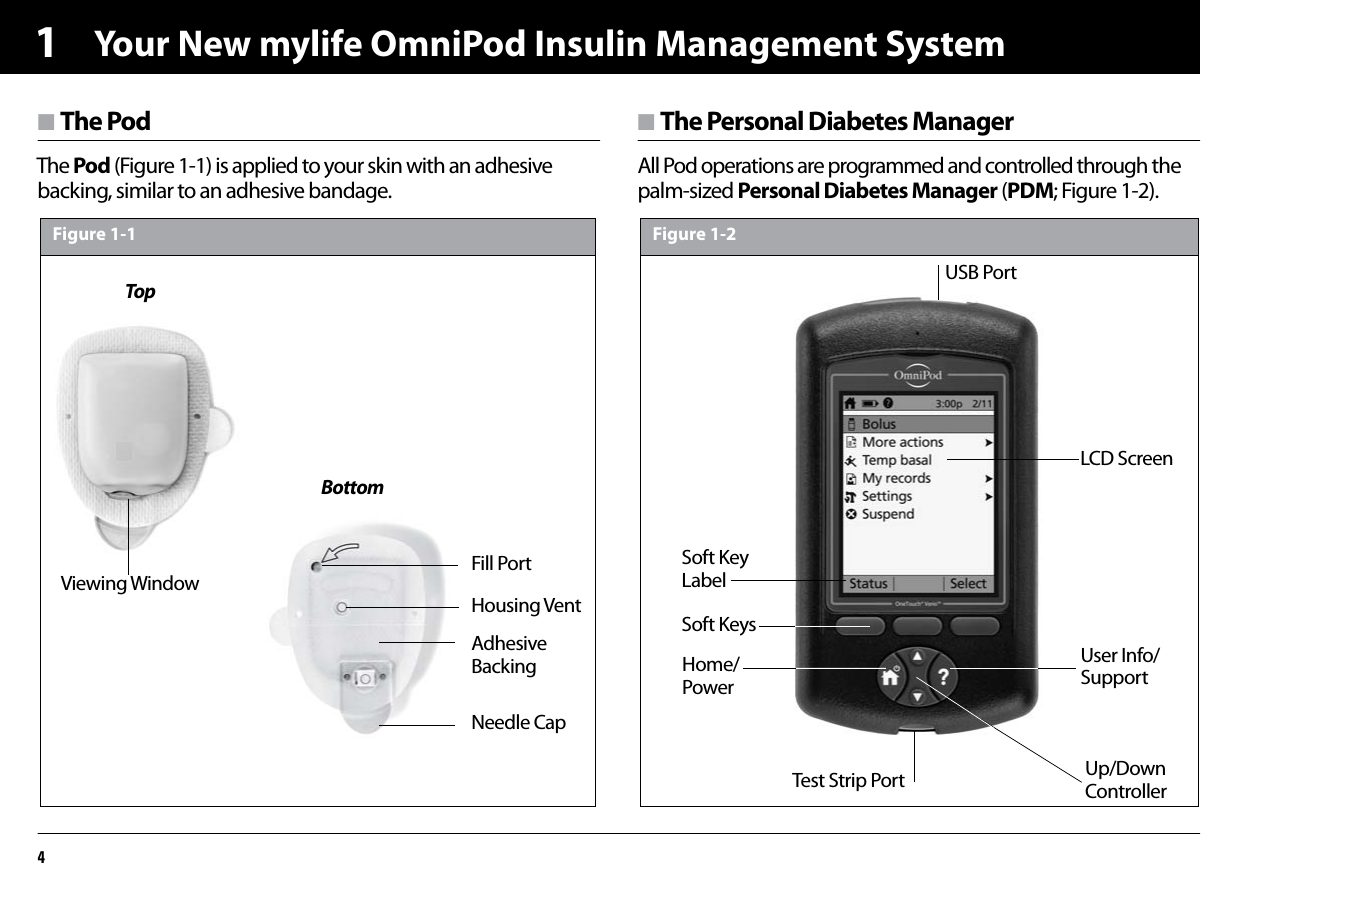 Your New mylife OmniPod Insulin Management System41n The PodThe Pod (Figure 1-1) is applied to your skin with an adhesive backing, similar to an adhesive bandage.n The Personal Diabetes ManagerAll Pod operations are programmed and controlled through the palm-sized Personal Diabetes Manager (PDM; Figure 1-2).TopBottomNeedle CapViewing WindowFill PortFigure 1-1Adhesive BackingHousing VentFigure 1-2Up/Down ControllerUser Info/SupportSoft Key LabelSoft KeysHome/PowerUSB PortTest Strip PortLCD Screen